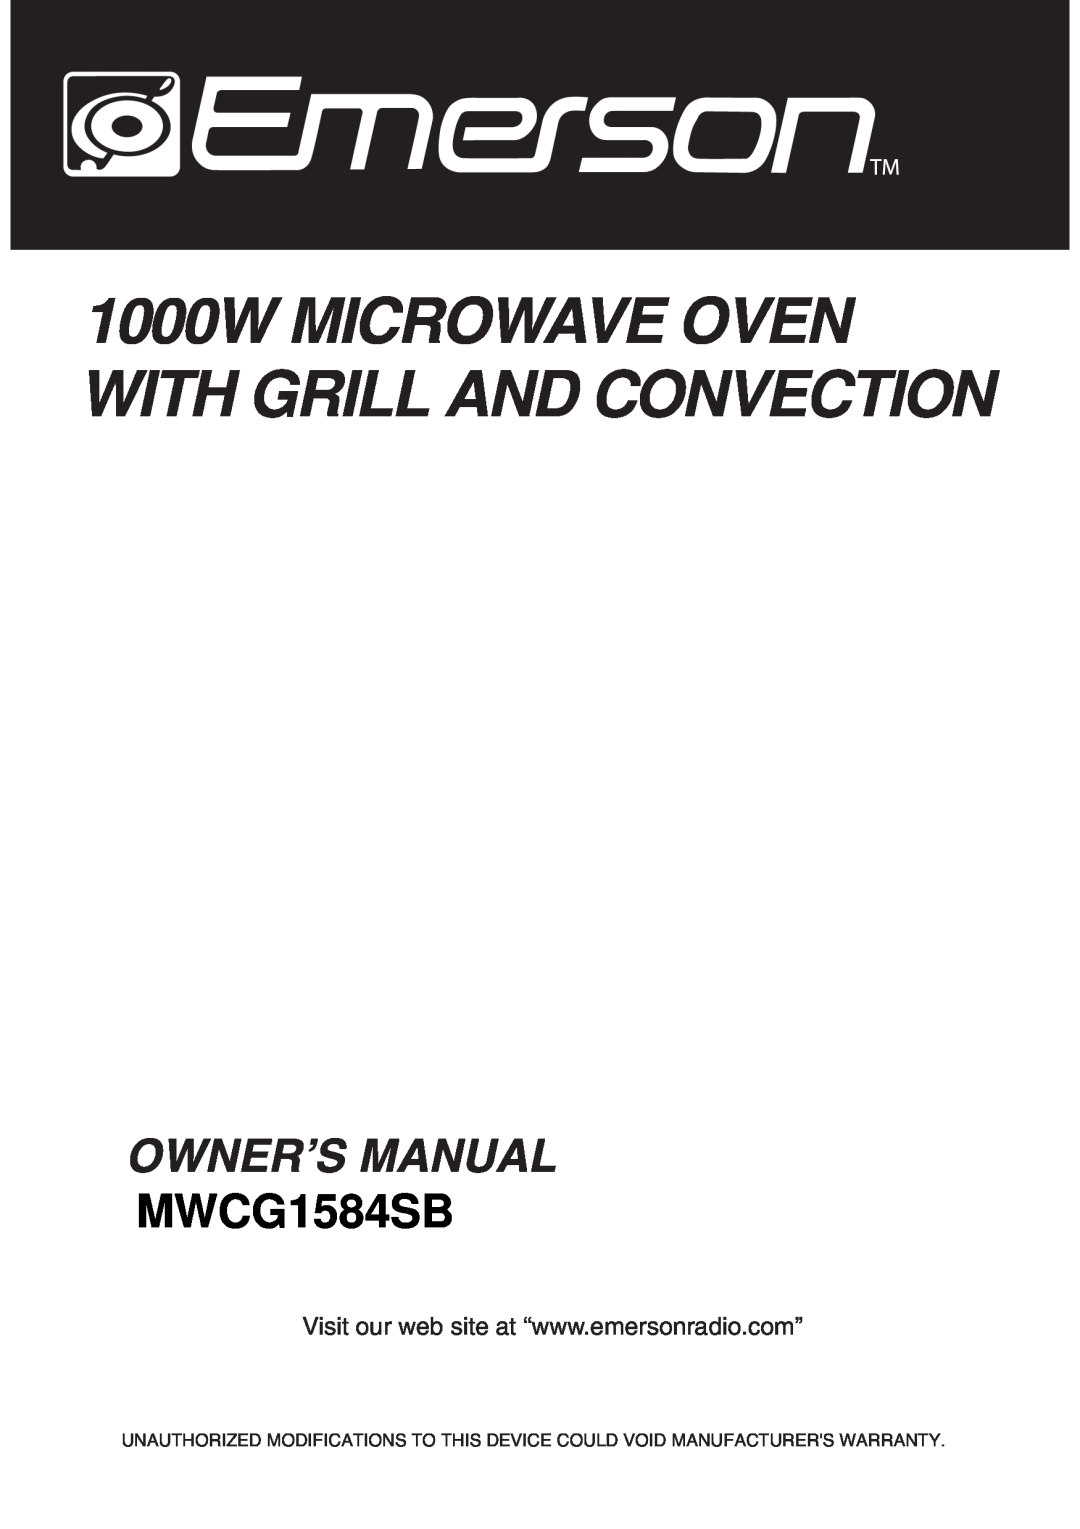 Emerson MWCG1584SB owner manual 1000W MICROWAVE OVEN WITH GRILL AND CONVECTION, Owner’S Manual 